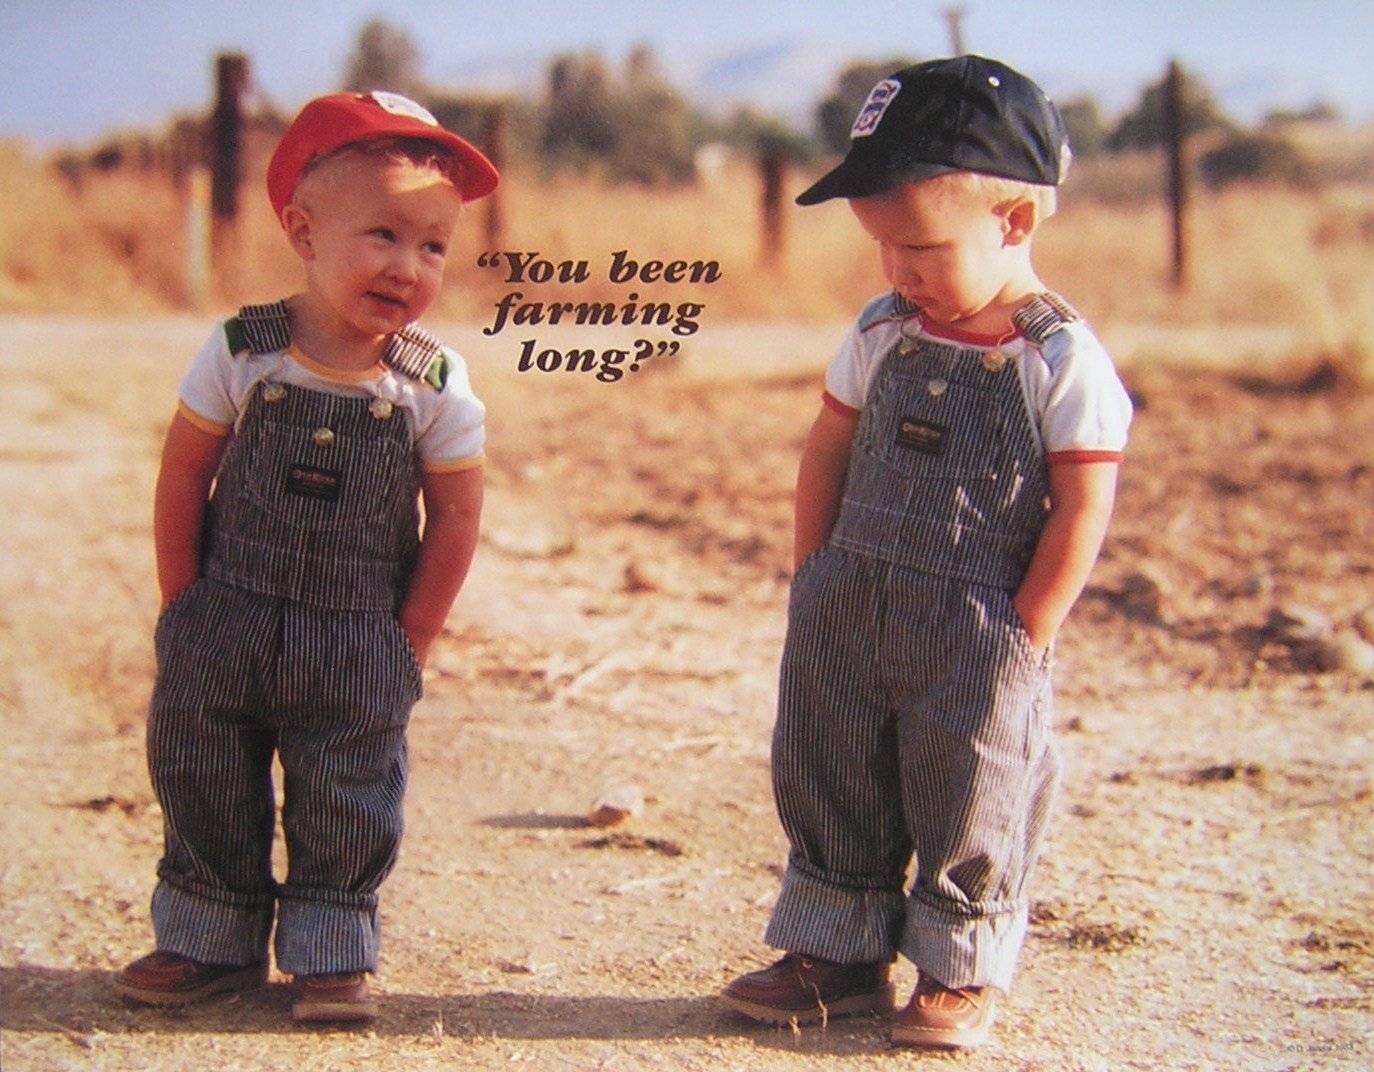 Two young boys in overalls, one asking "You been farming long?"